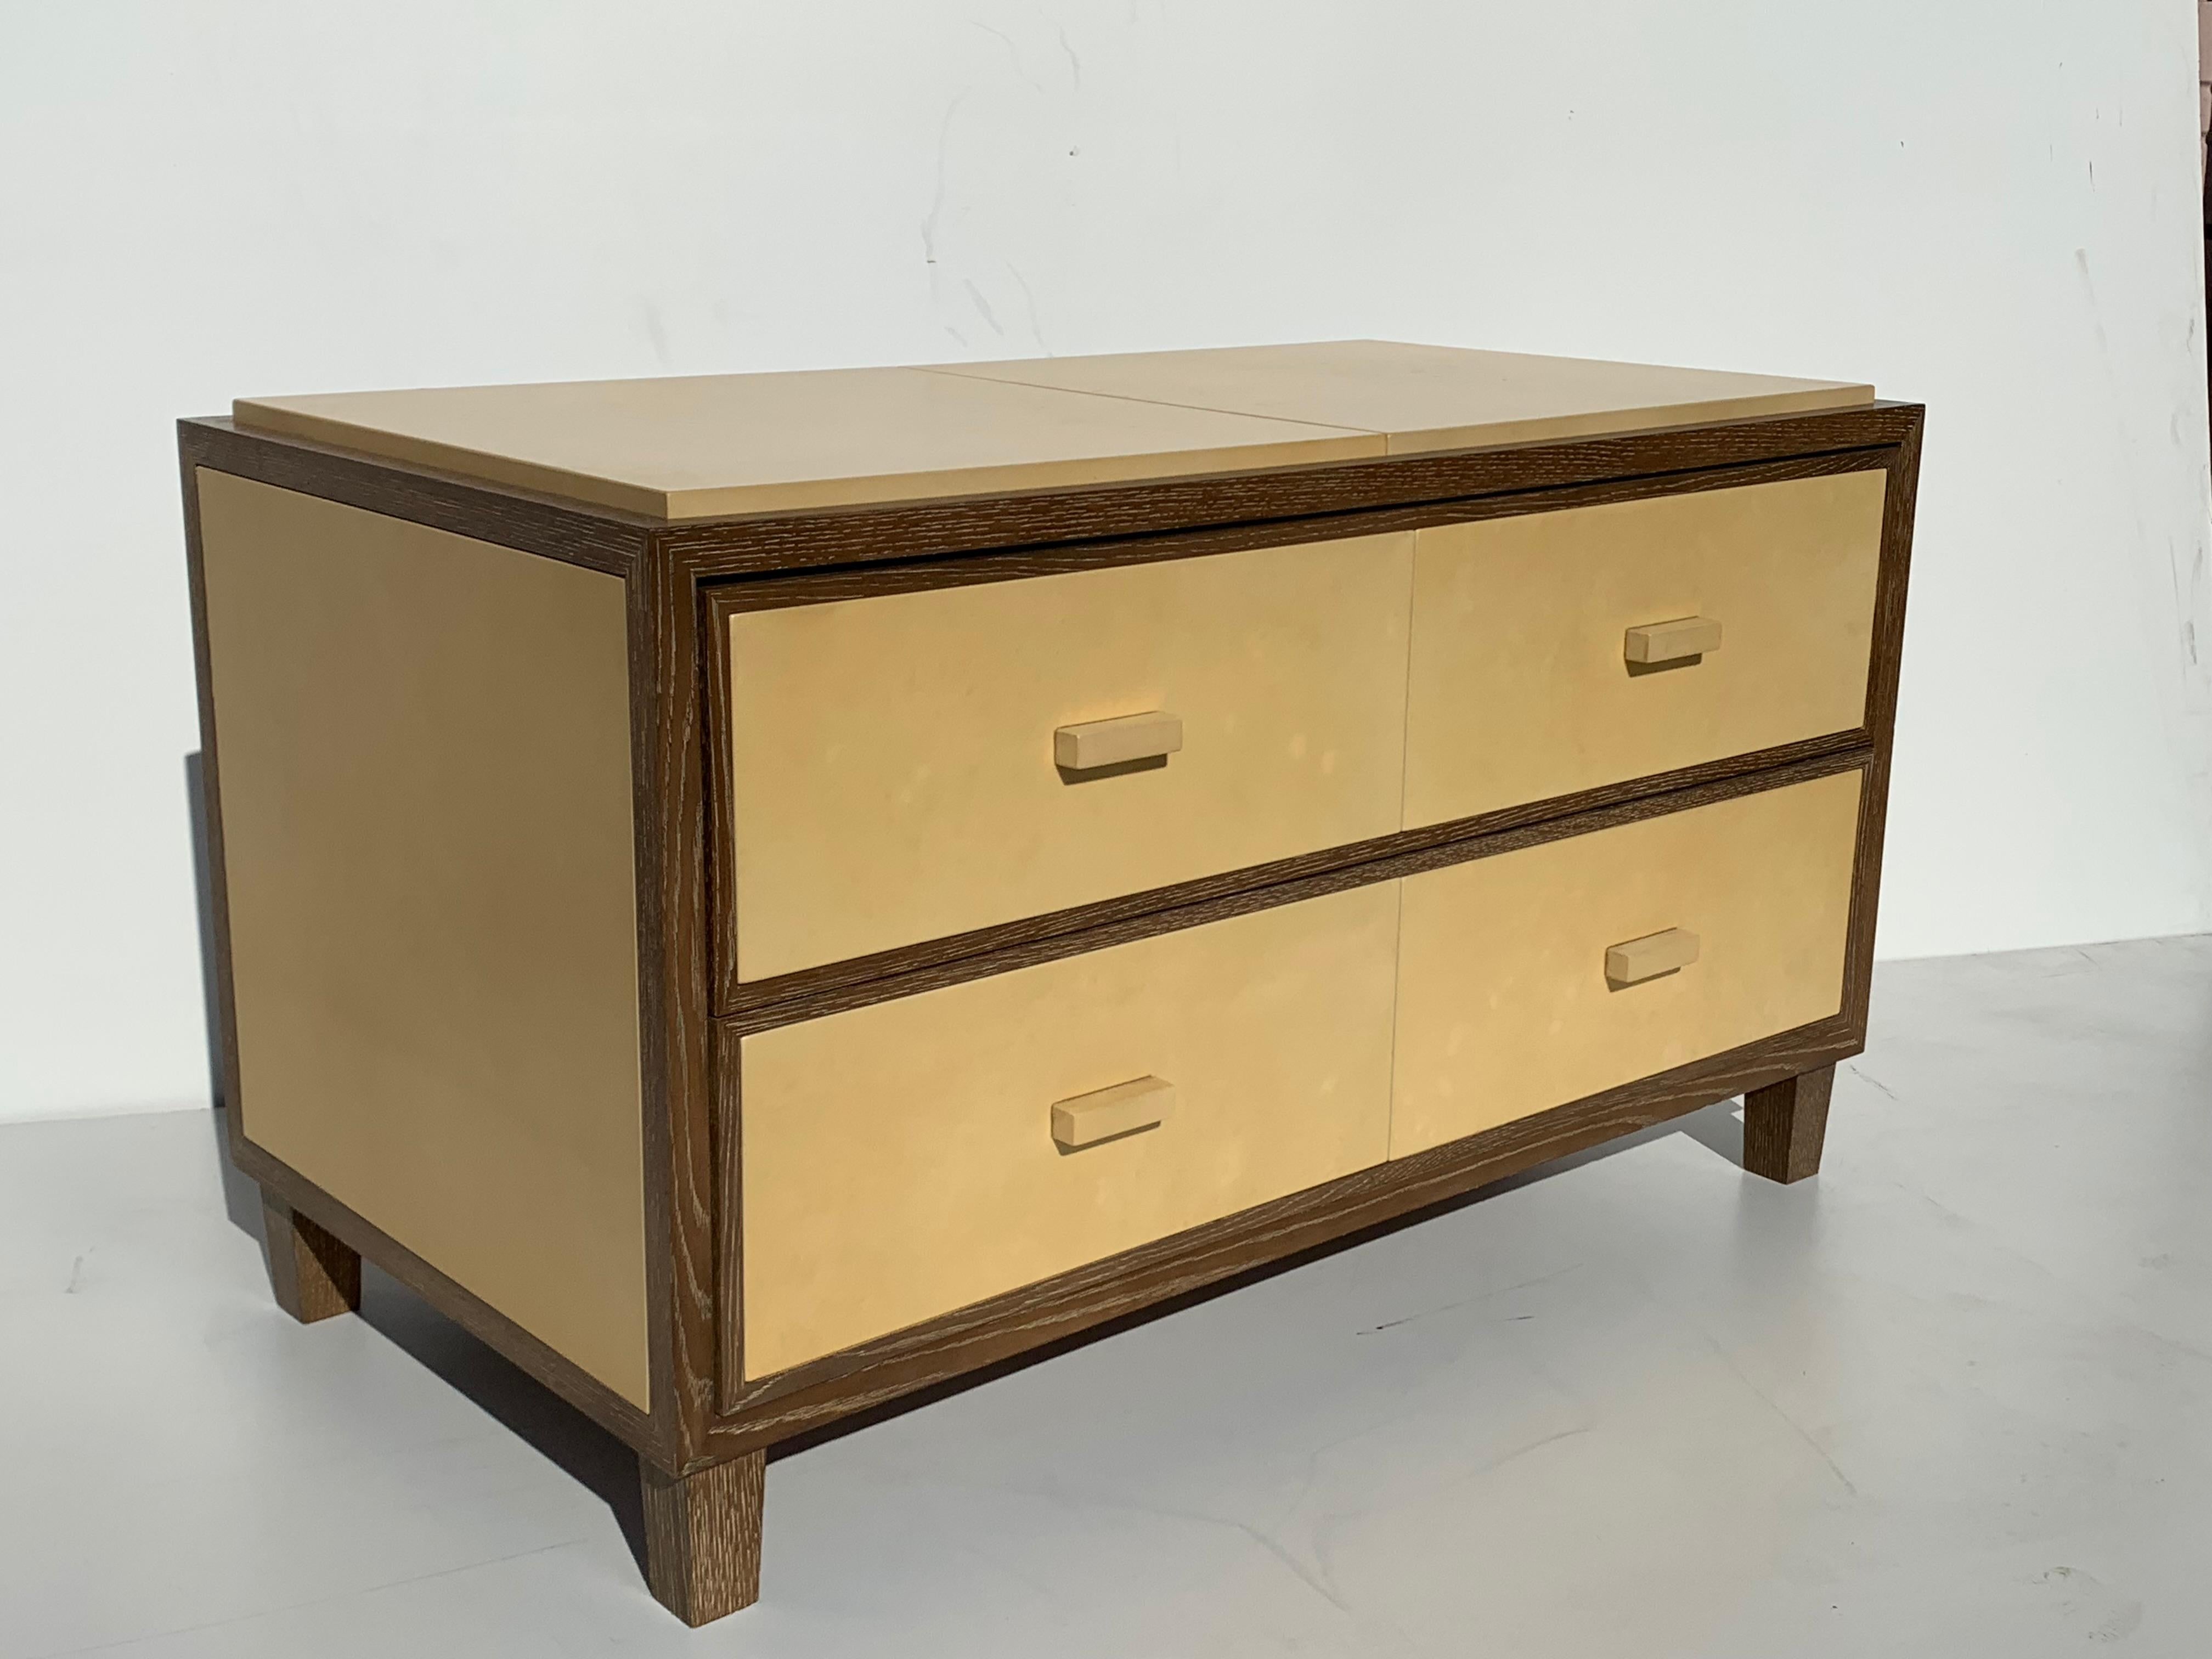 Cerused oak and parchment commode / dresser / nightstand with two large drawers. Measures: Inside each
drawer is 19